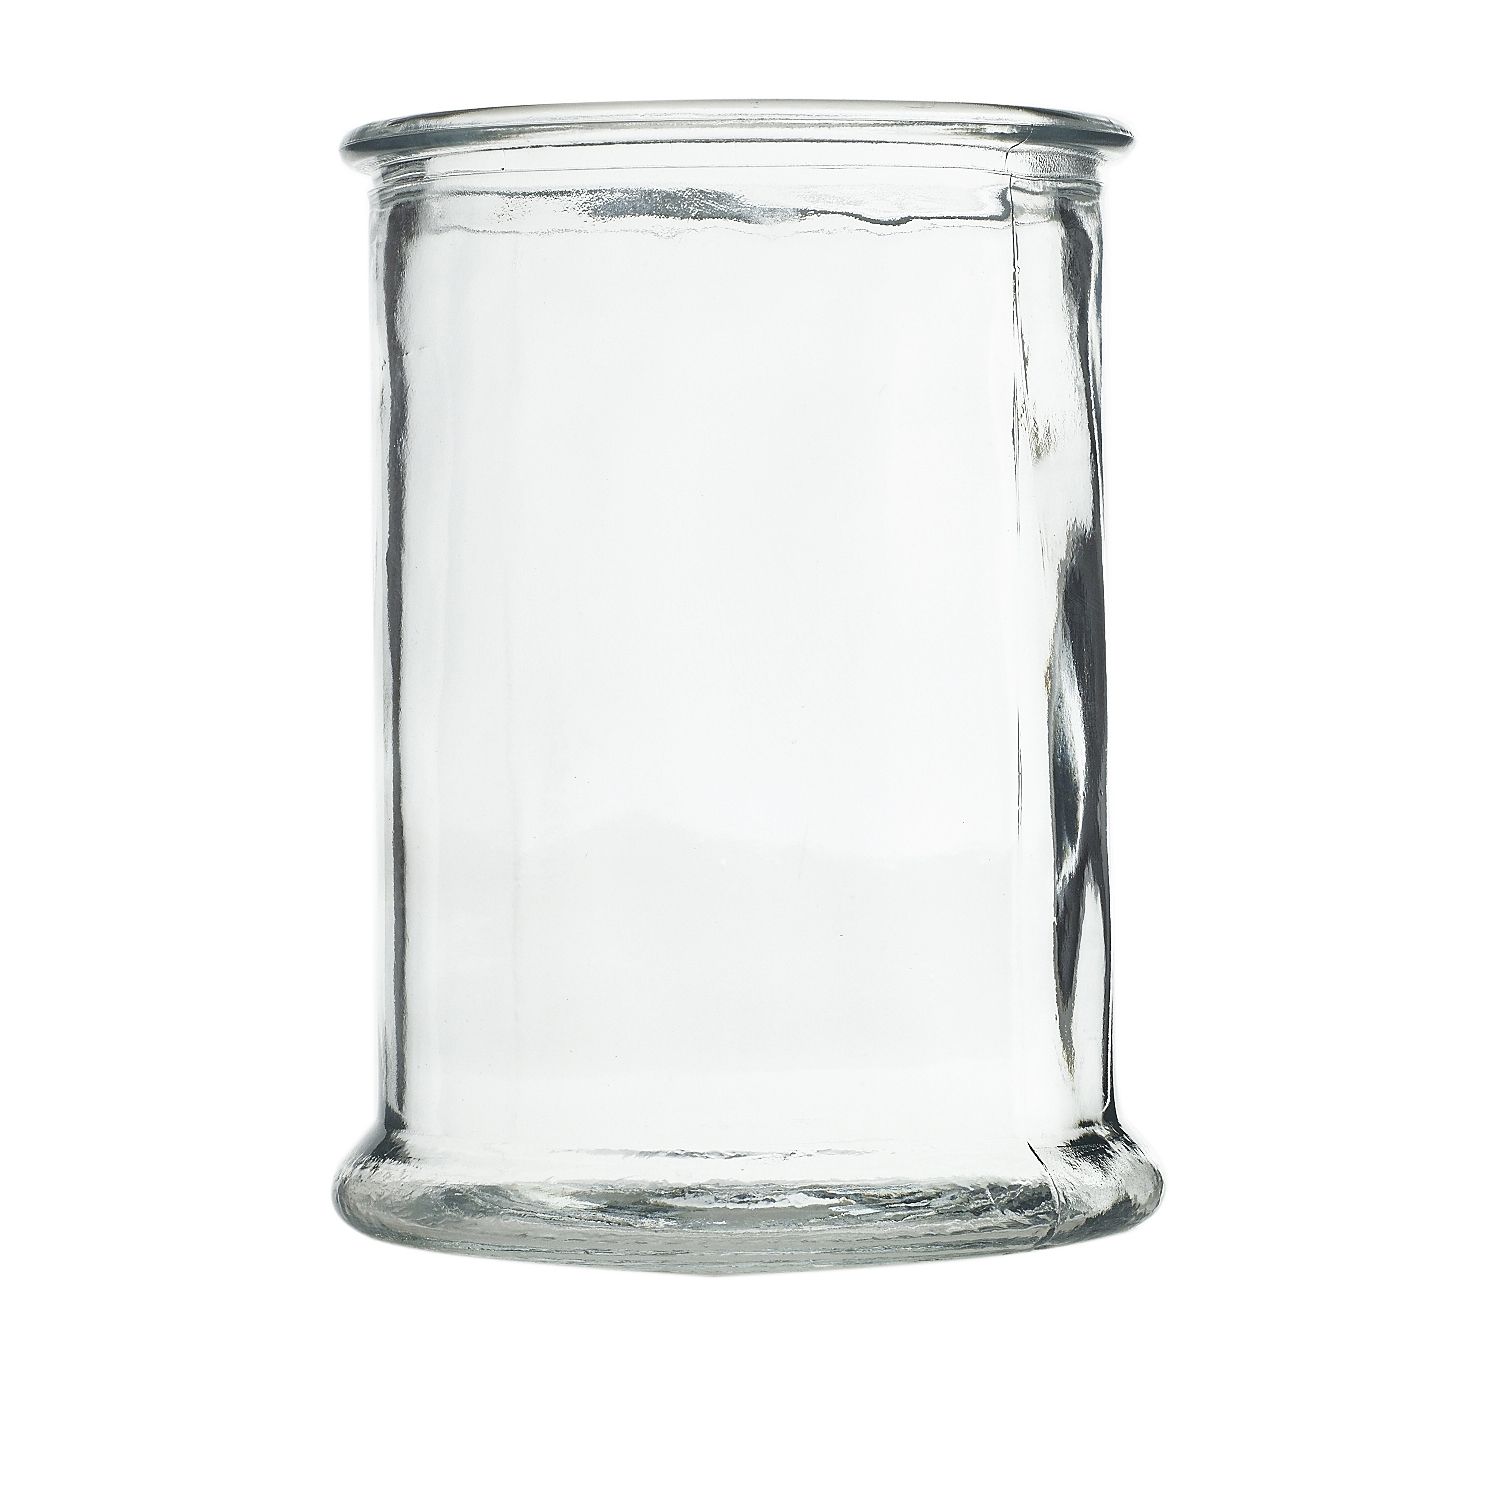 This wide-base hurricane makes a classic, understated home for flowers or candles. Dimensions: 5" x 5" x 7" Opening Size: 4" Material: Glass Color: Clear